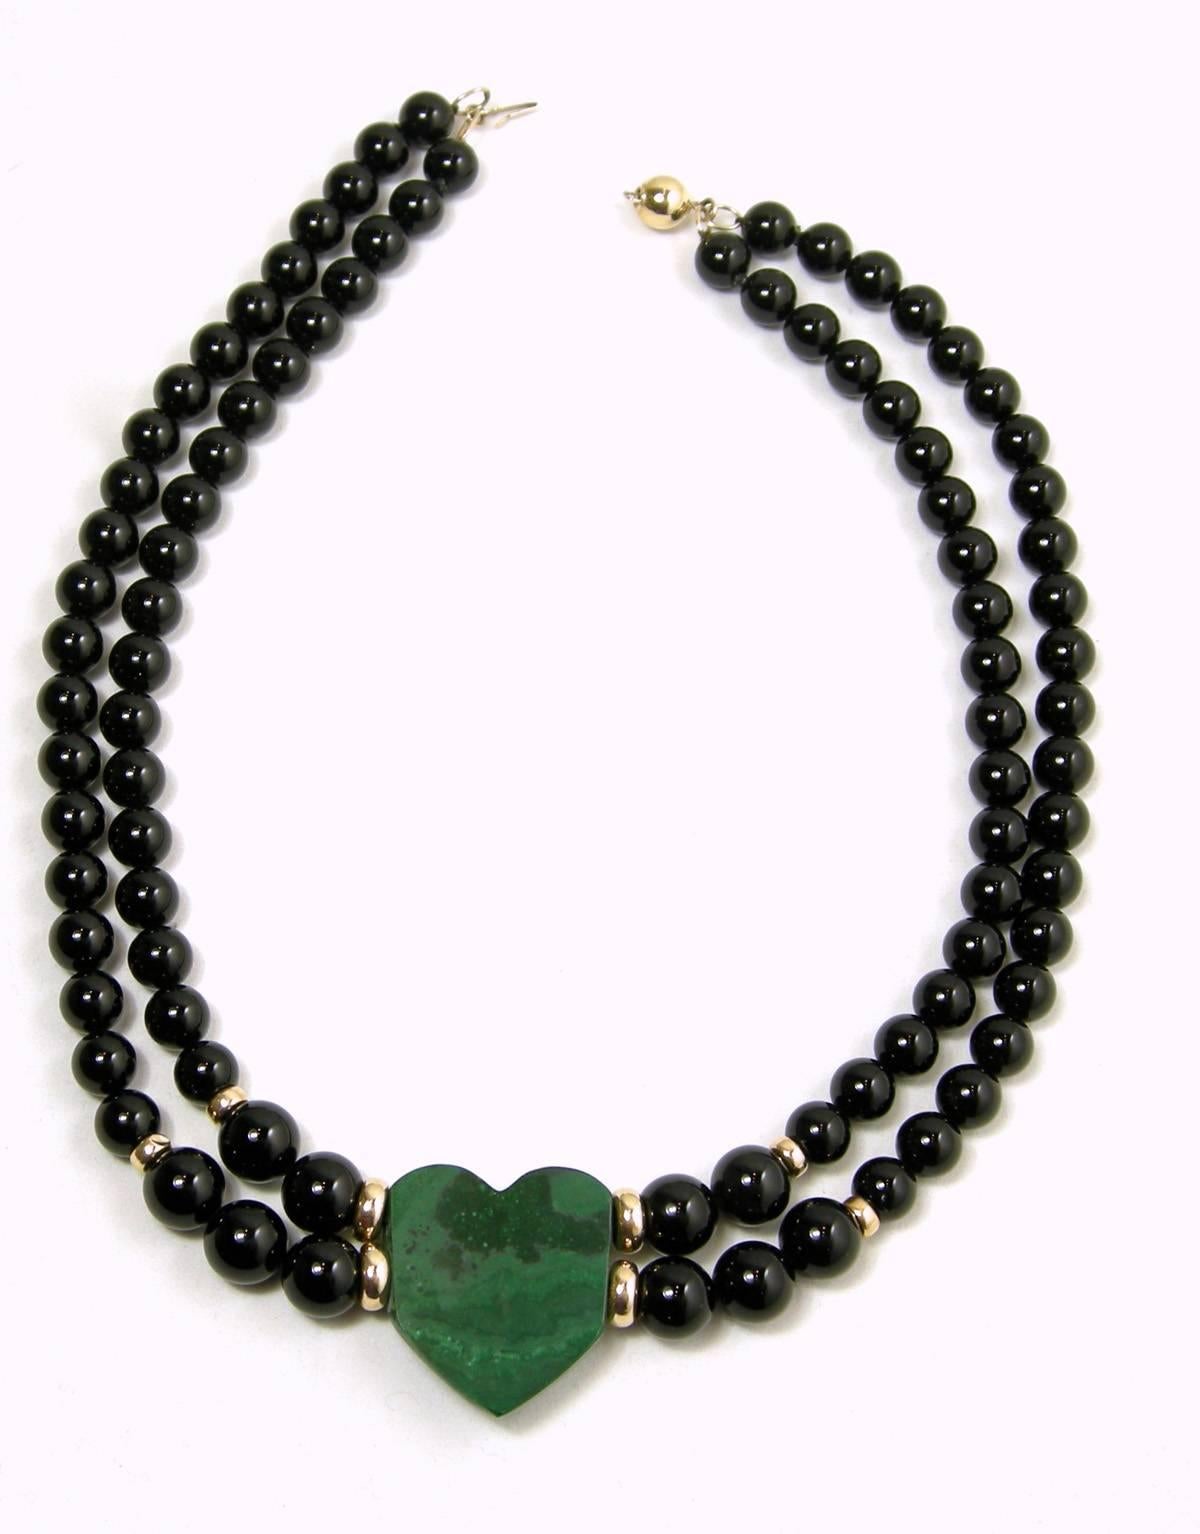 Women's or Men's Vintage 14KT Black Onyx and Green Malachite Heart Necklace